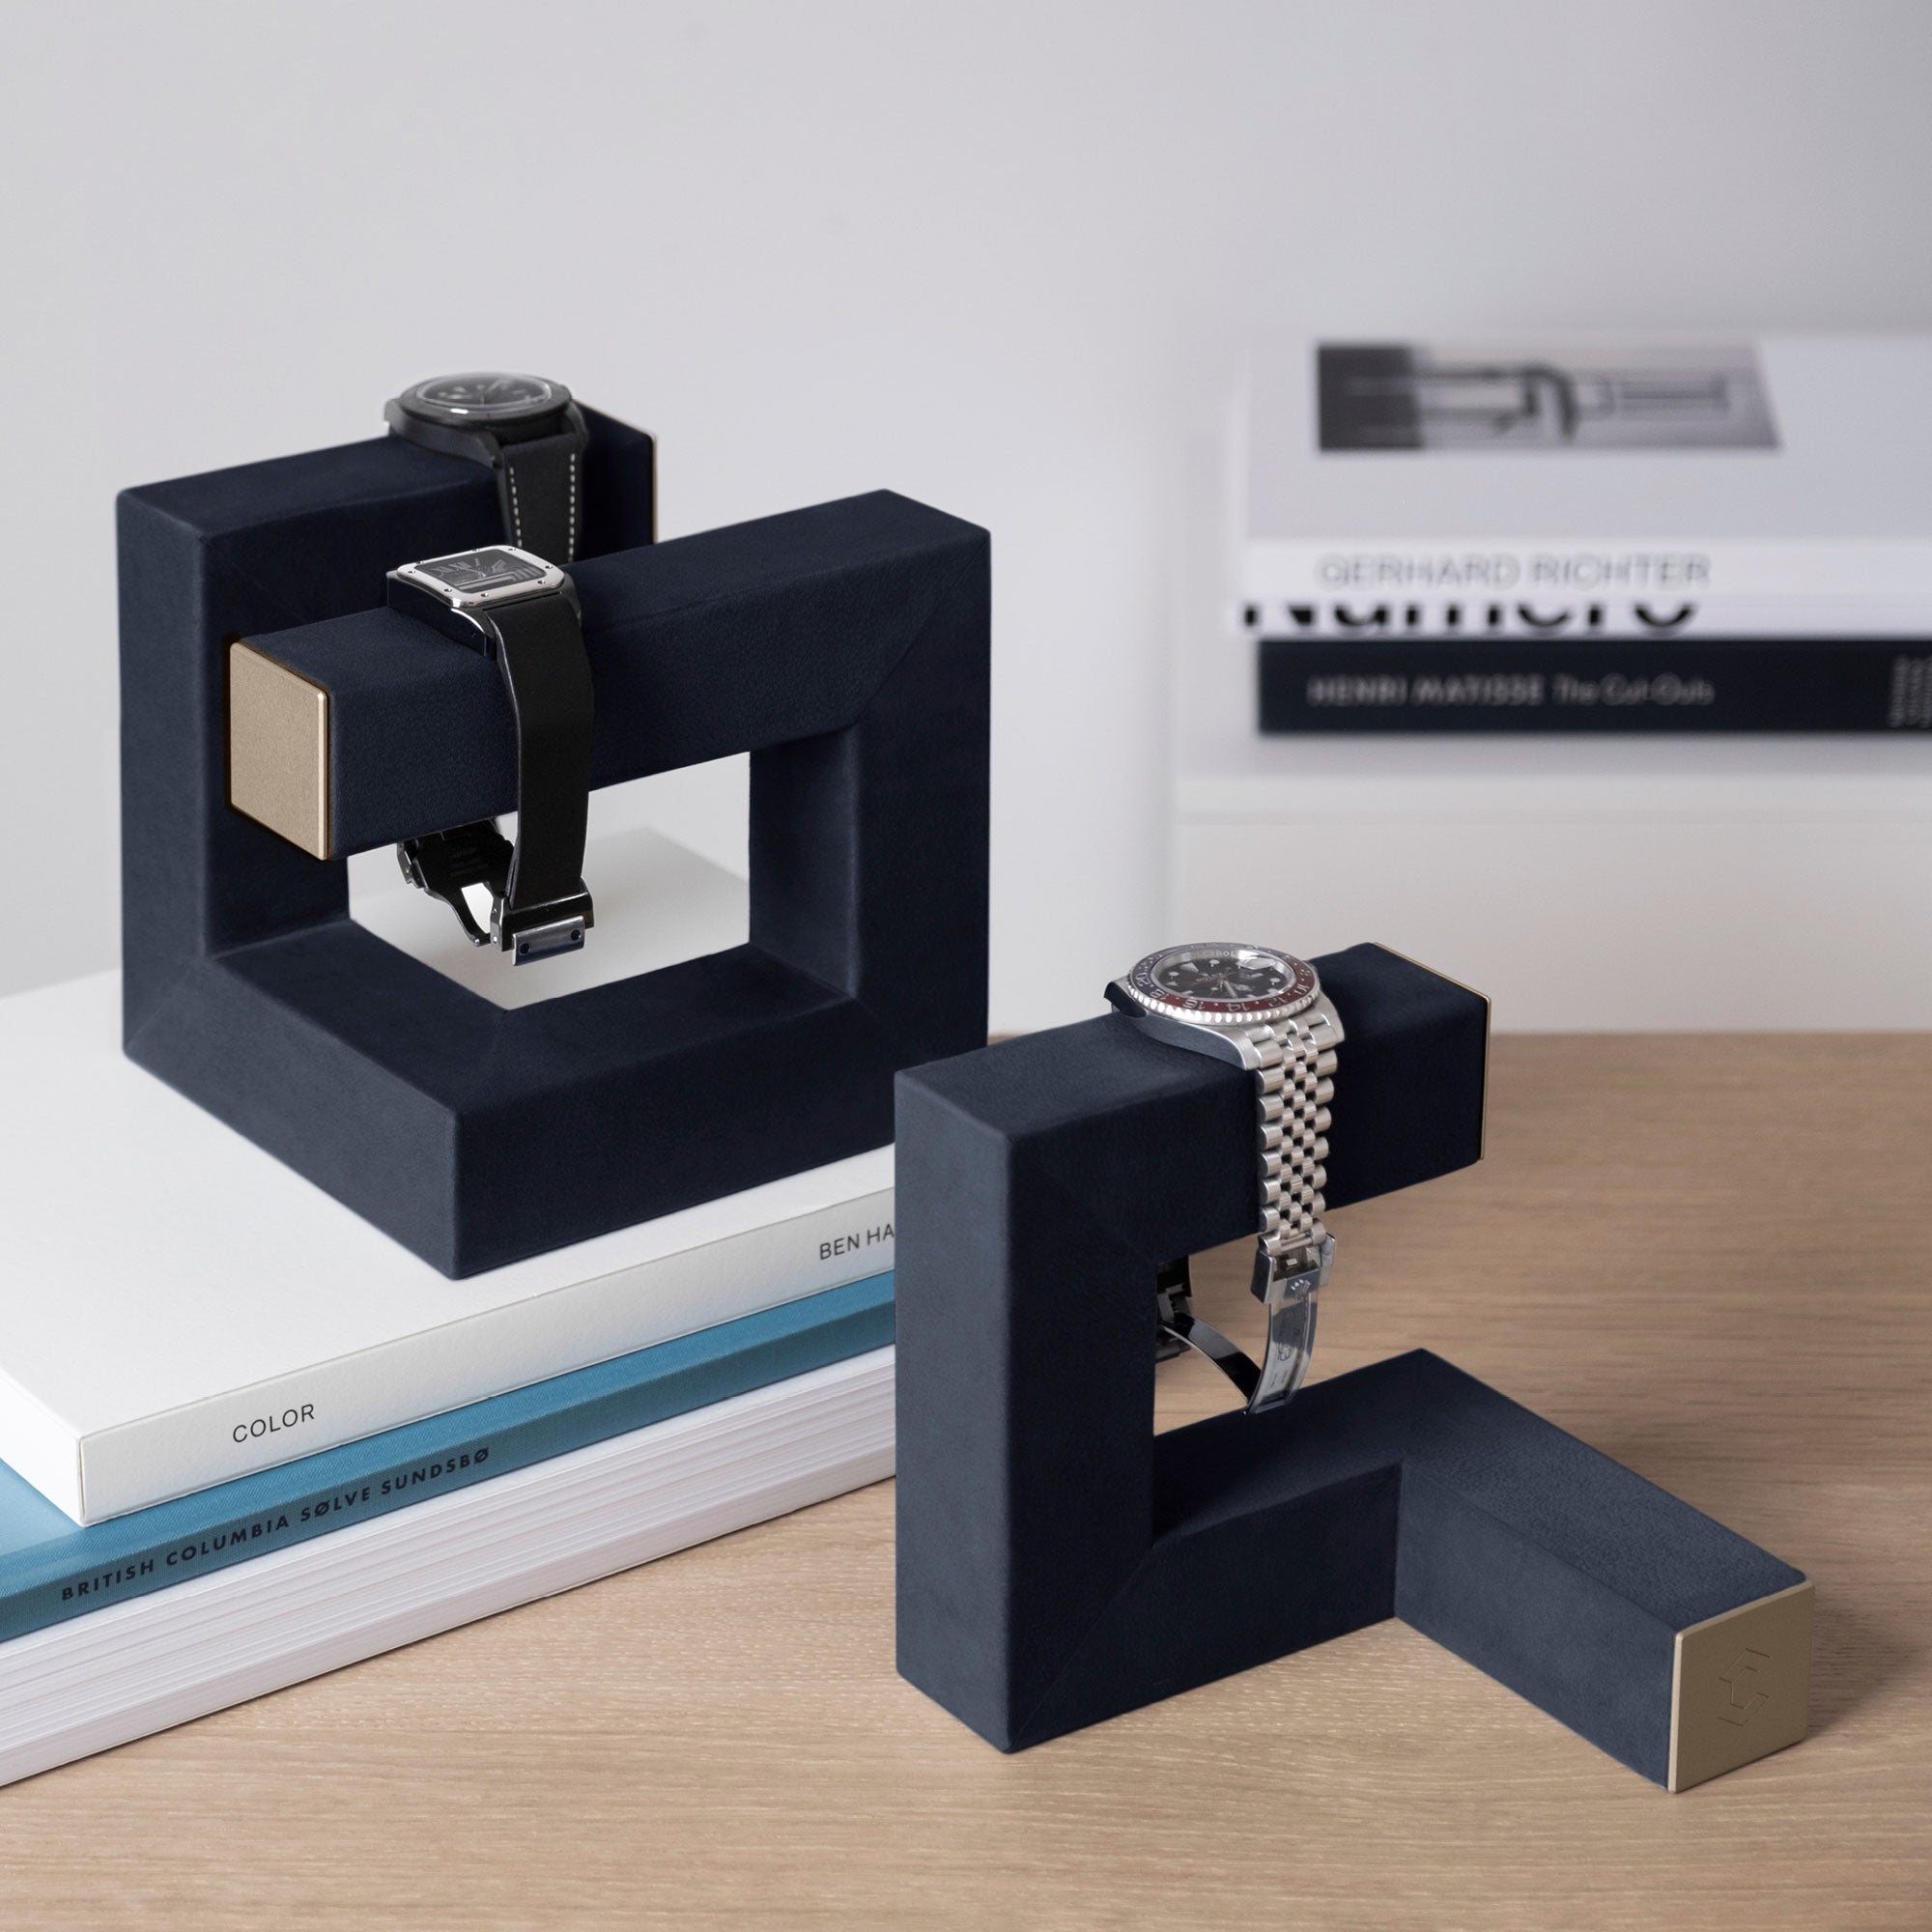 Hudson watch stands in navy leather and gold. Handmade to display your watches at home.